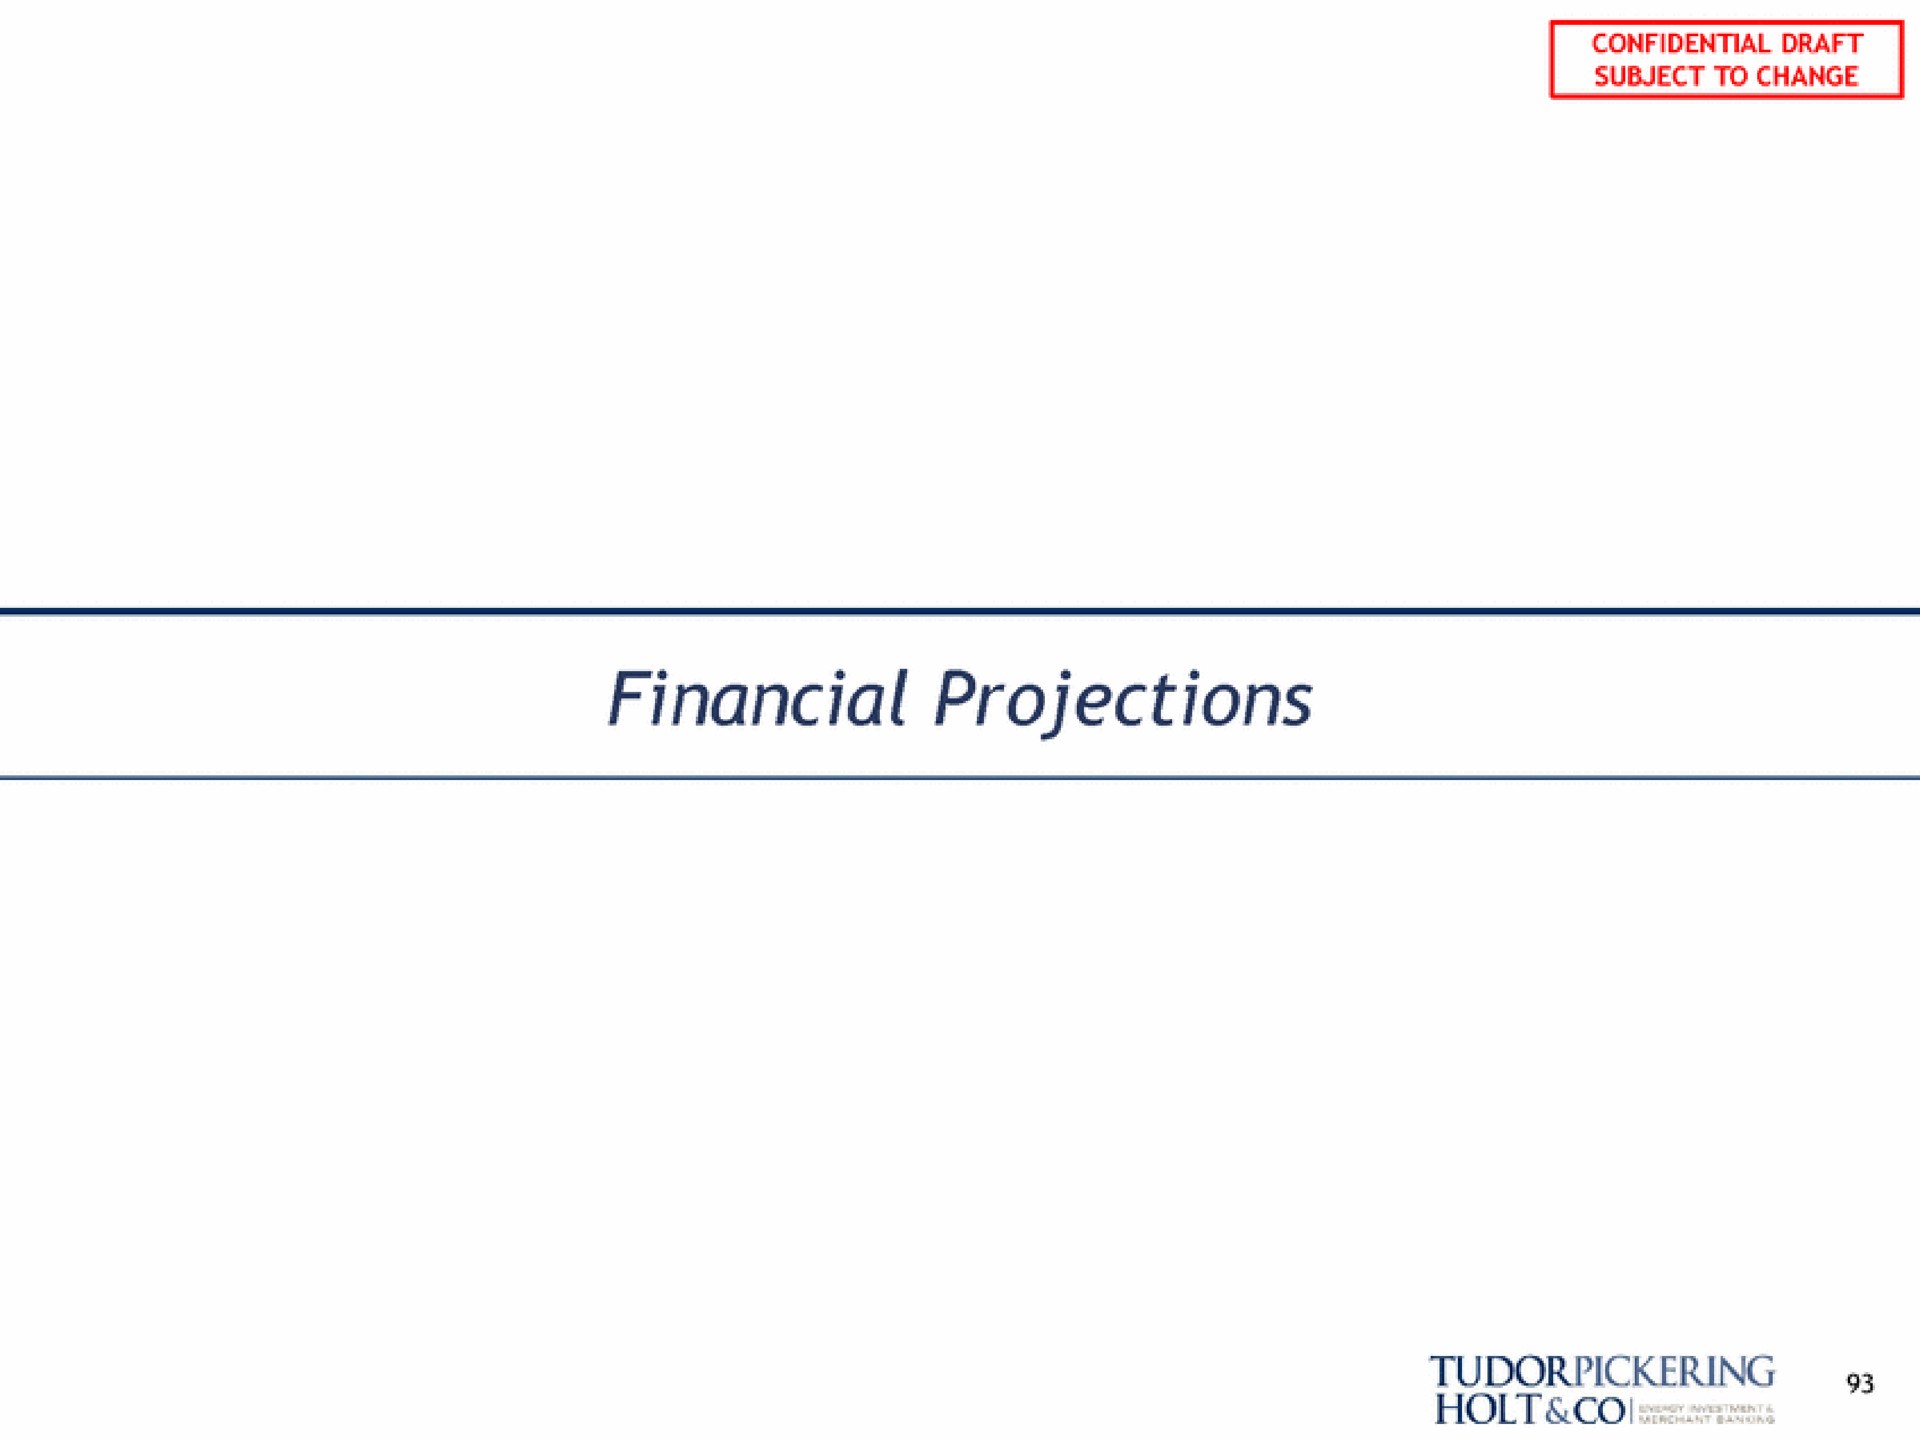 financial projections | Tudor, Pickering, Holt & Co